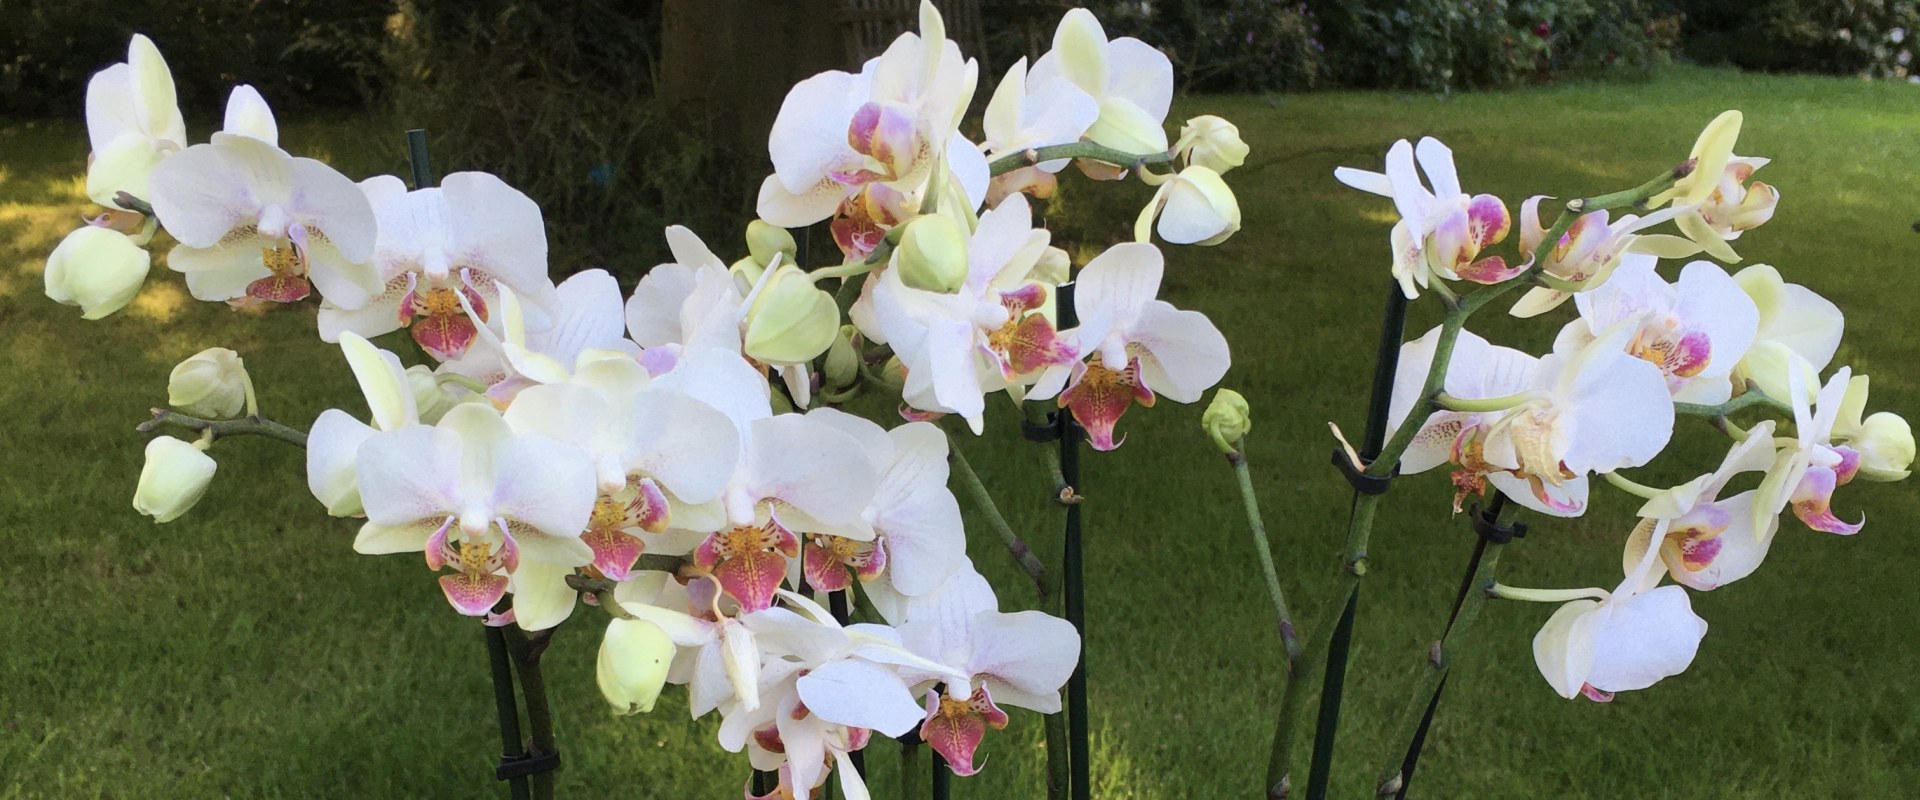 Selecting Orchids: A Guide to Local Nurseries and Garden Centers